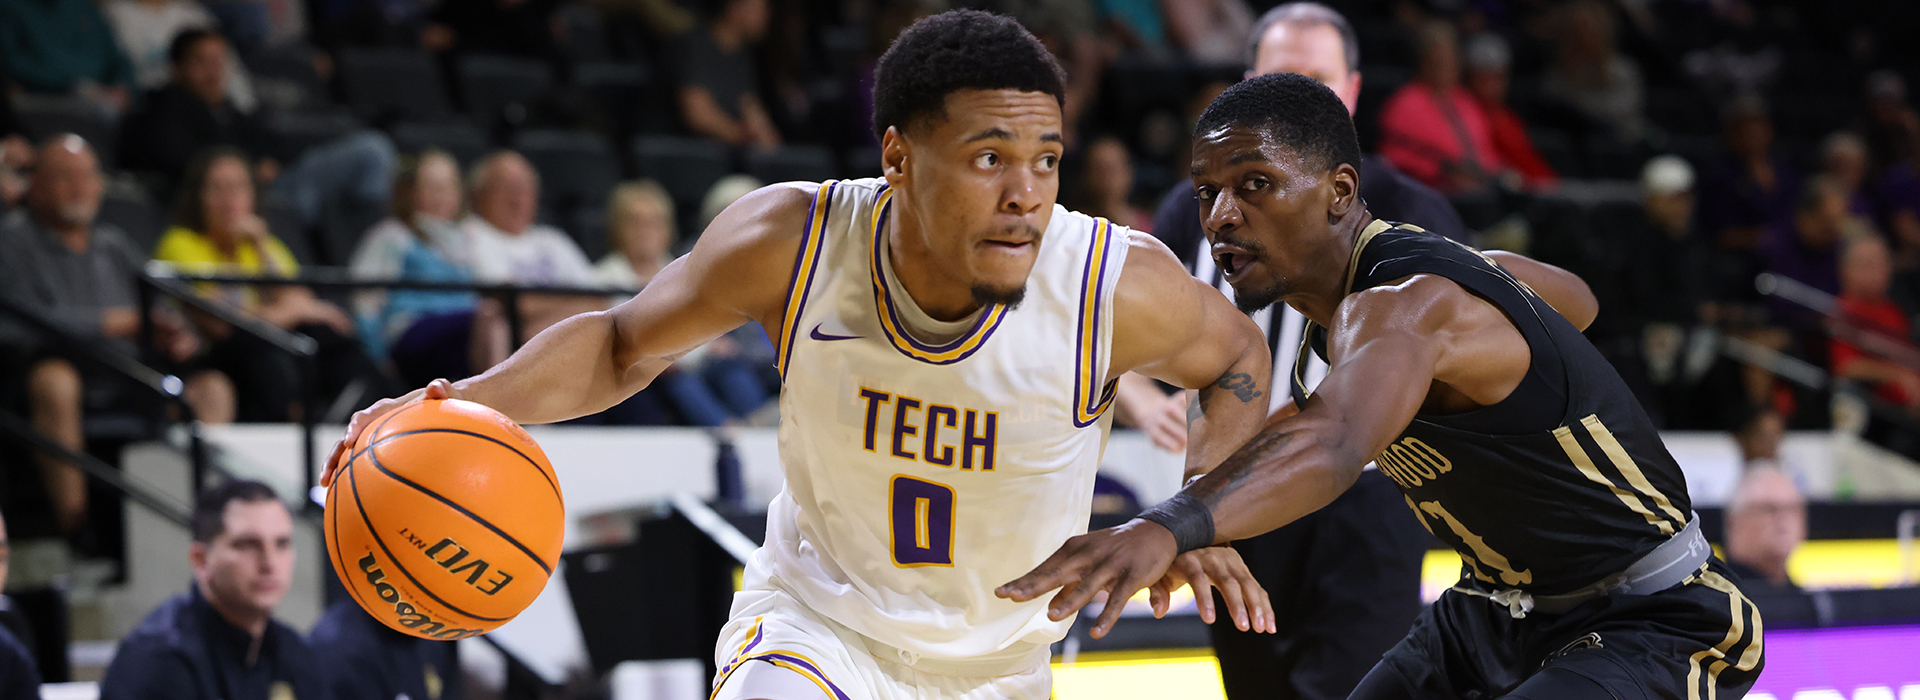 Tech wraps up home schedule with Senior Day contest against UT Martin on Saturday